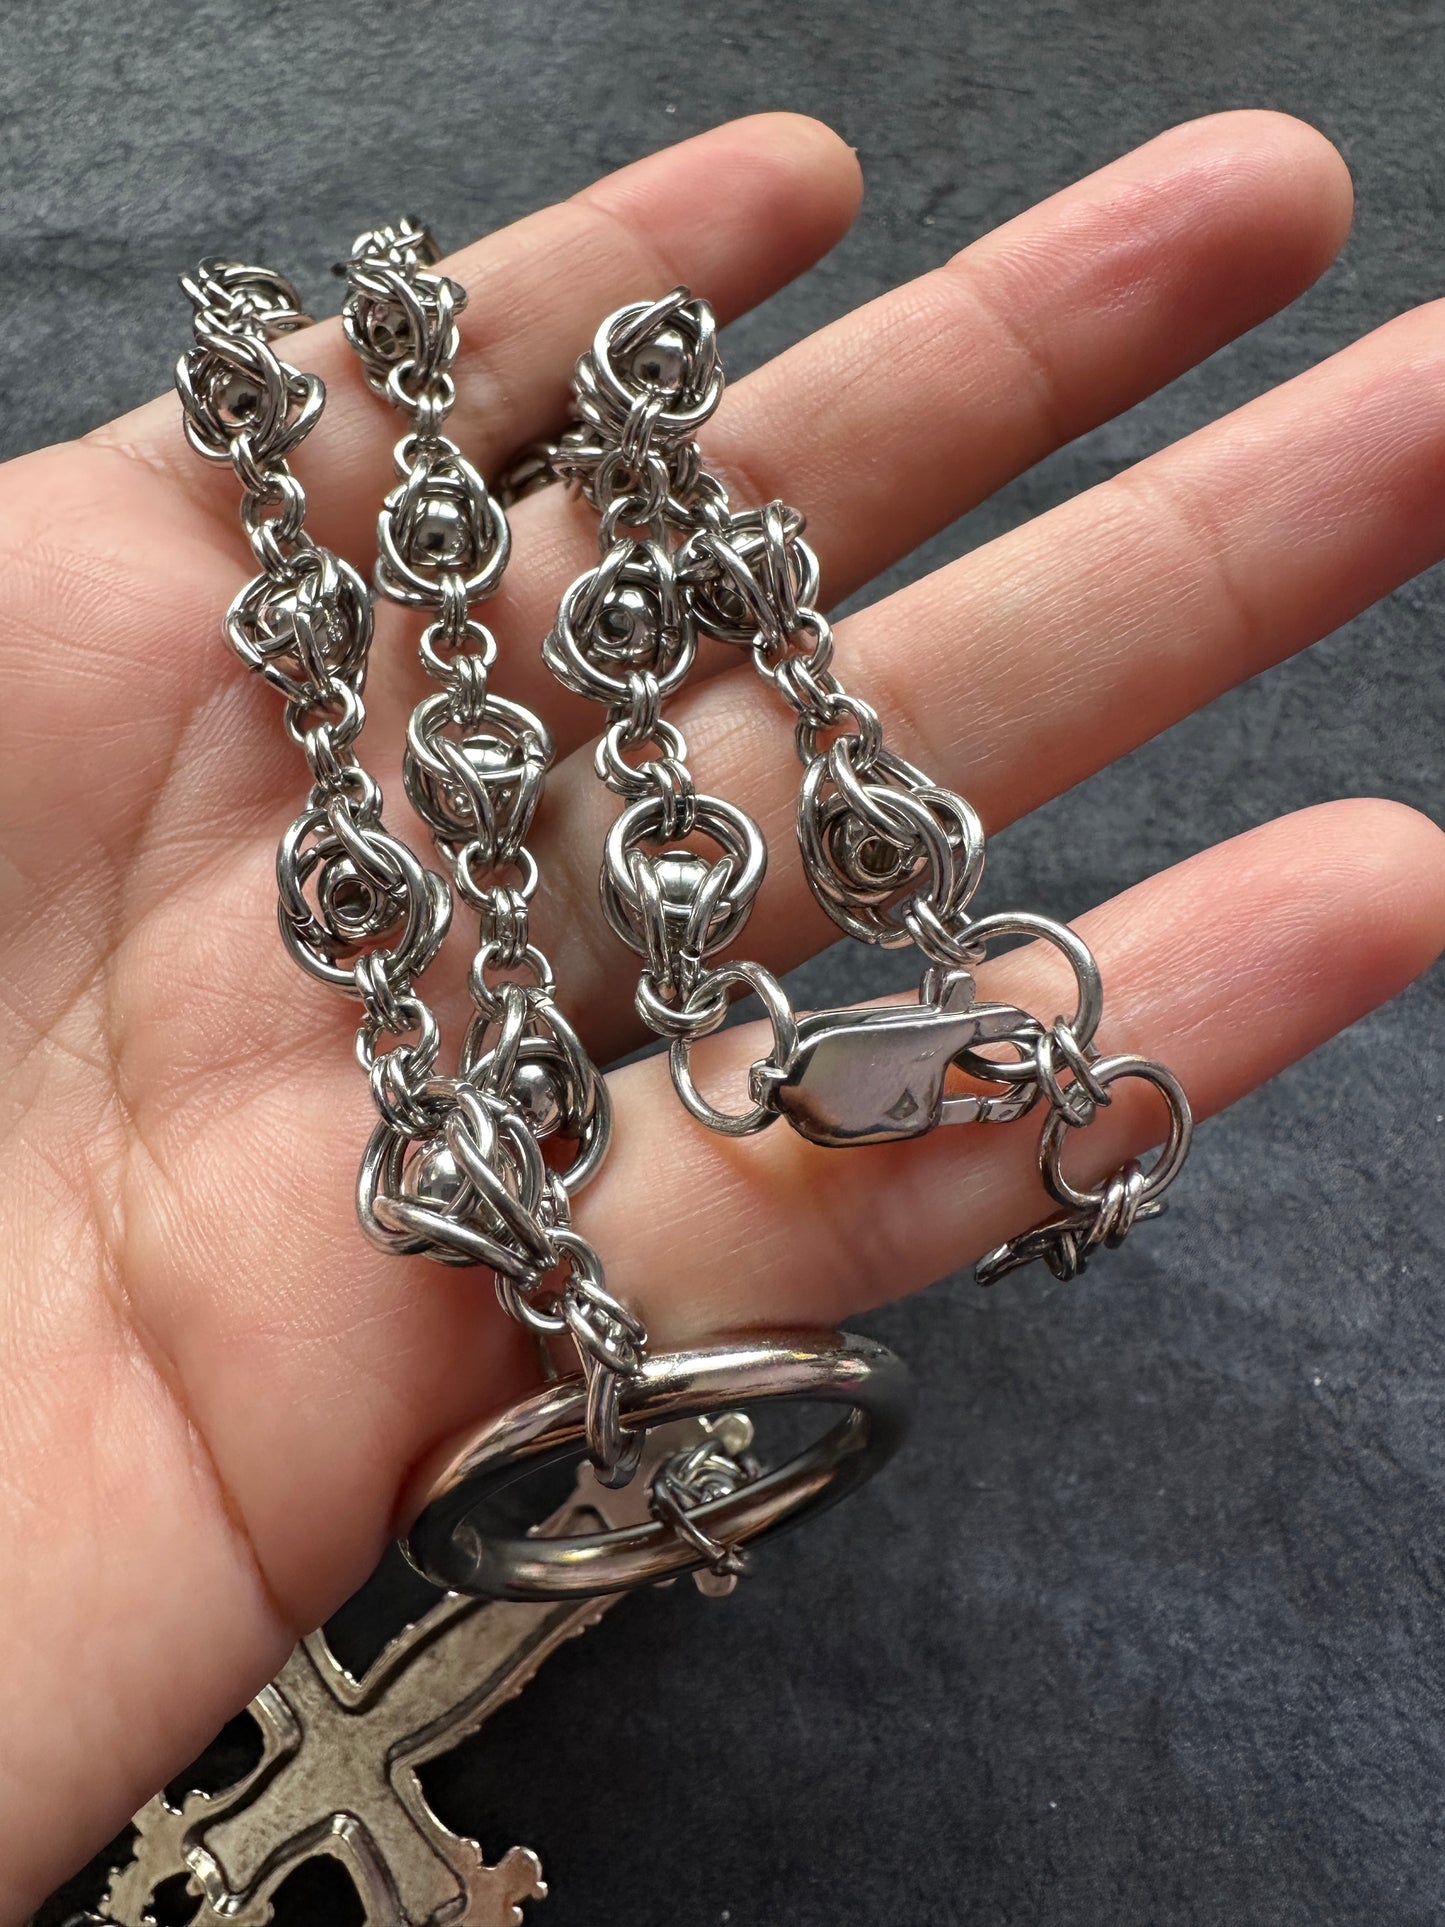 Large steel chainmaille necklace and cross